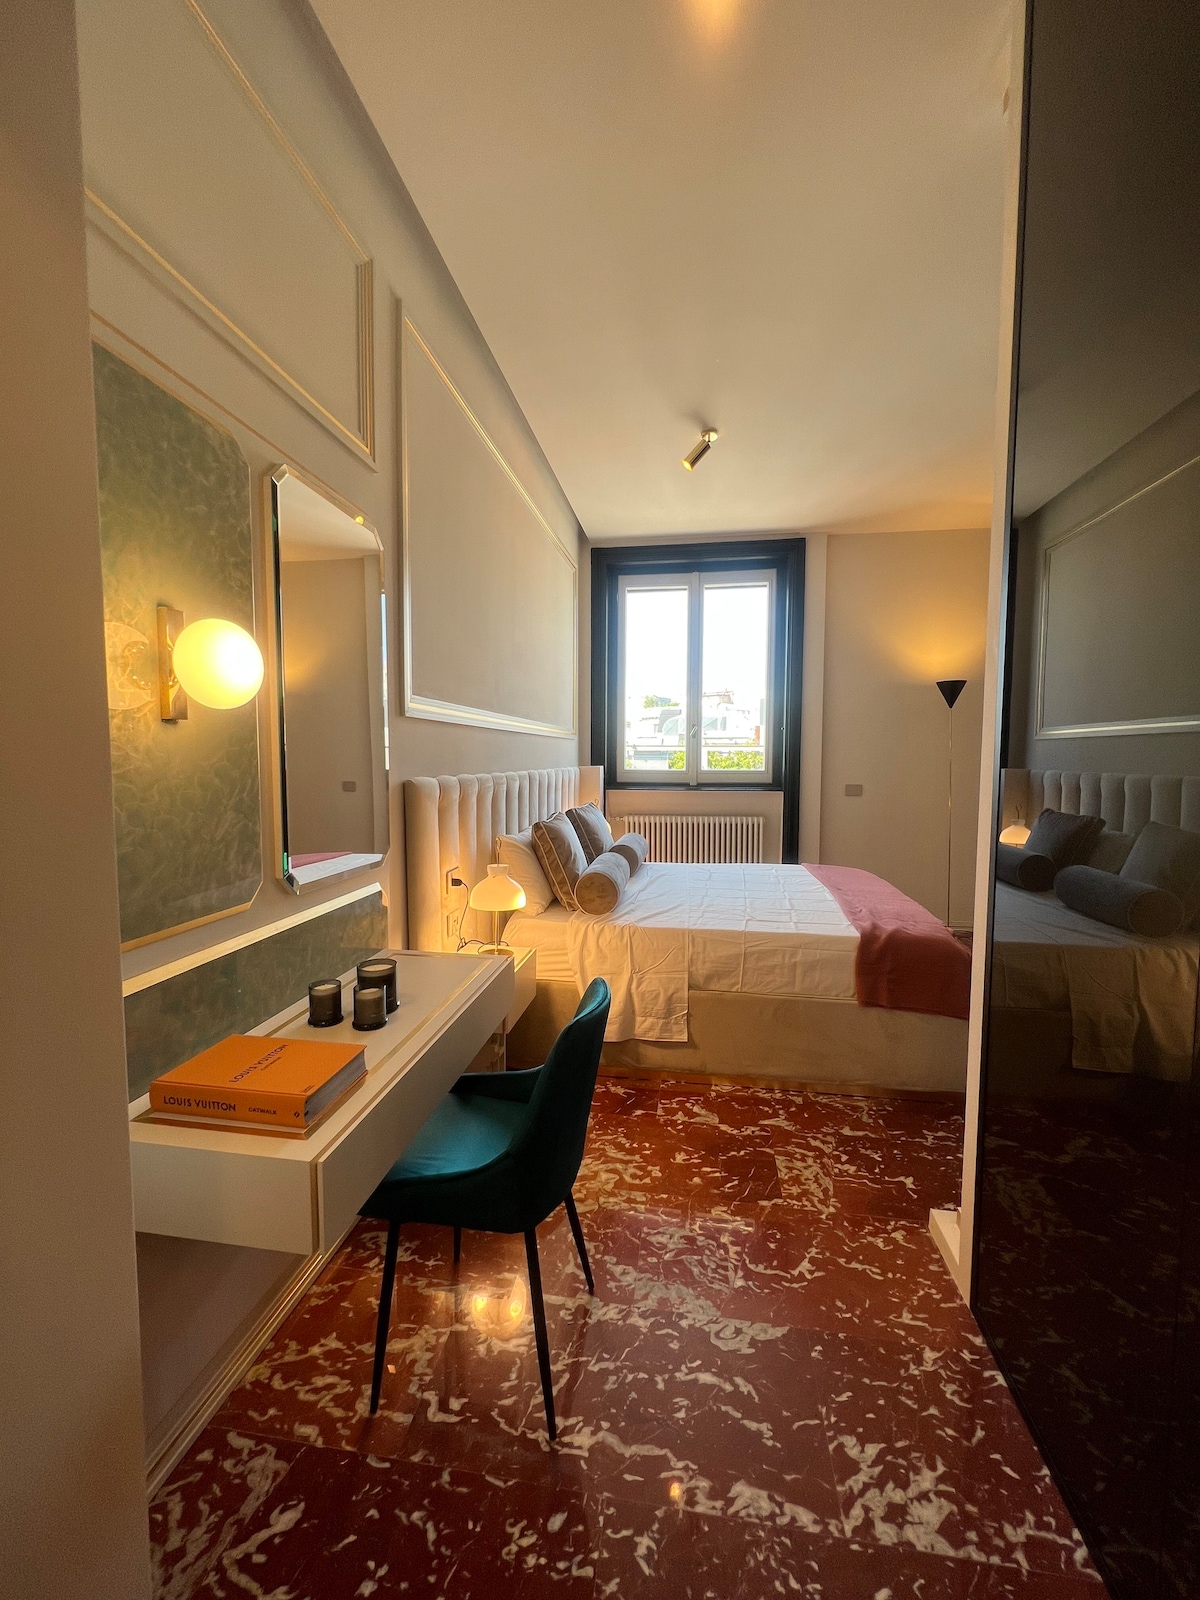 Suite 3 minutes' walk from the Duomo cathedral